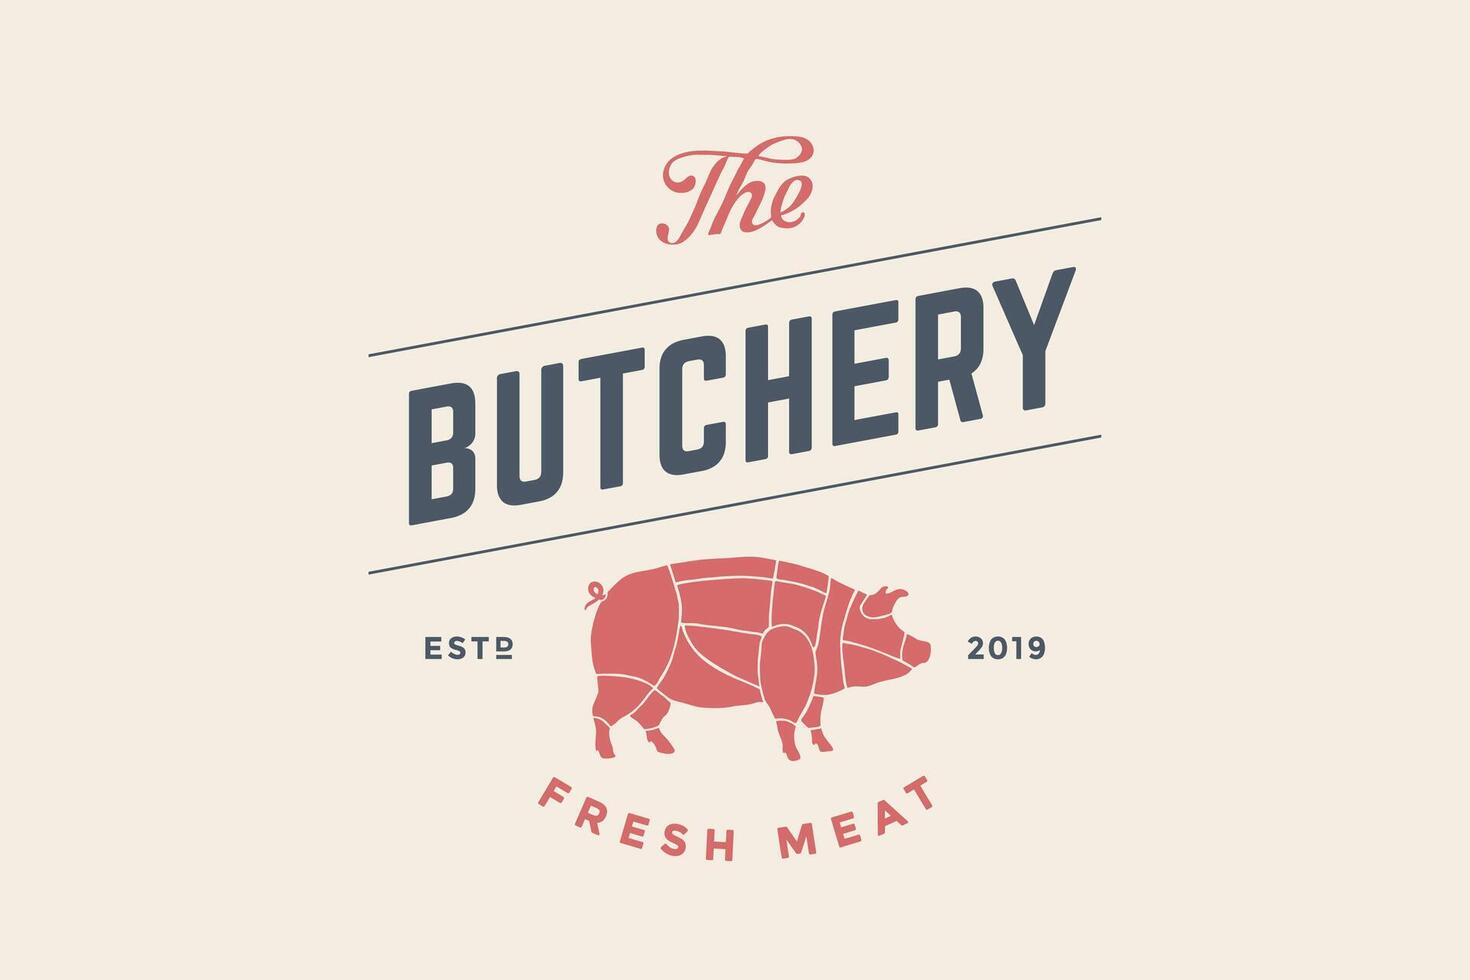 Emblem of Butchery meat shop with Pig silhouette vector